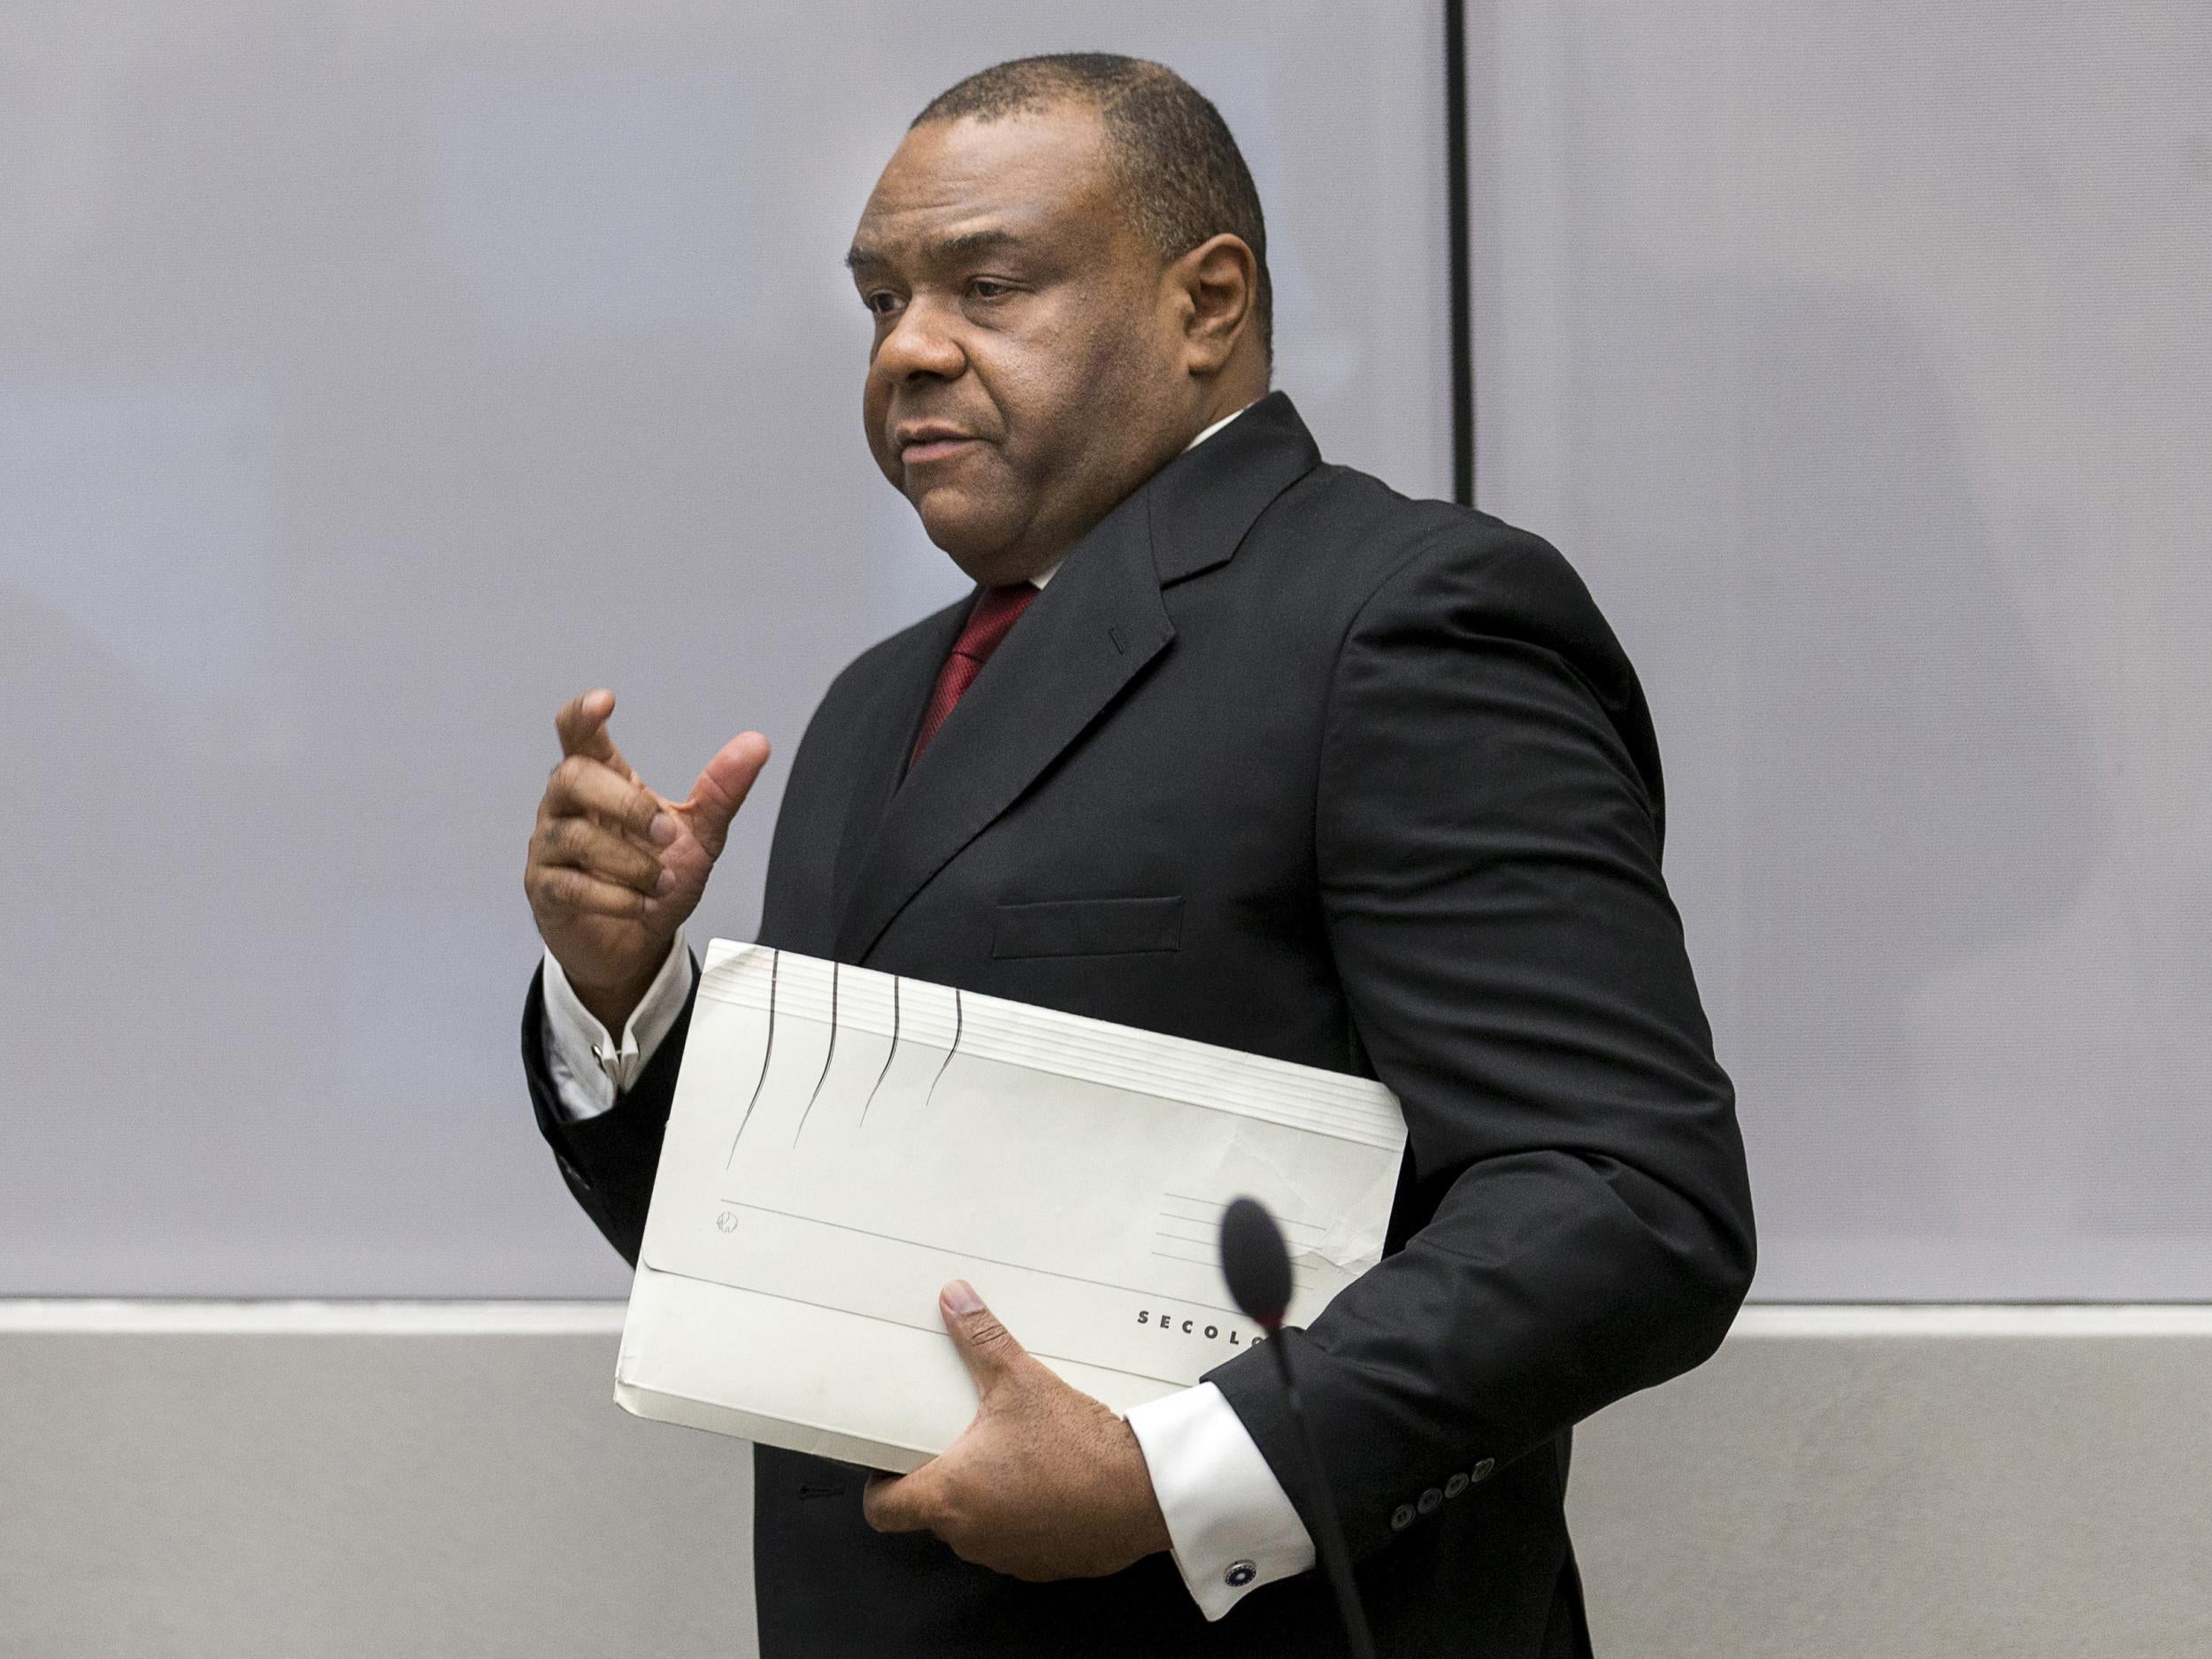 Bemba's attempts to influence his trial failed: earlier this year he was jailed for 18 years